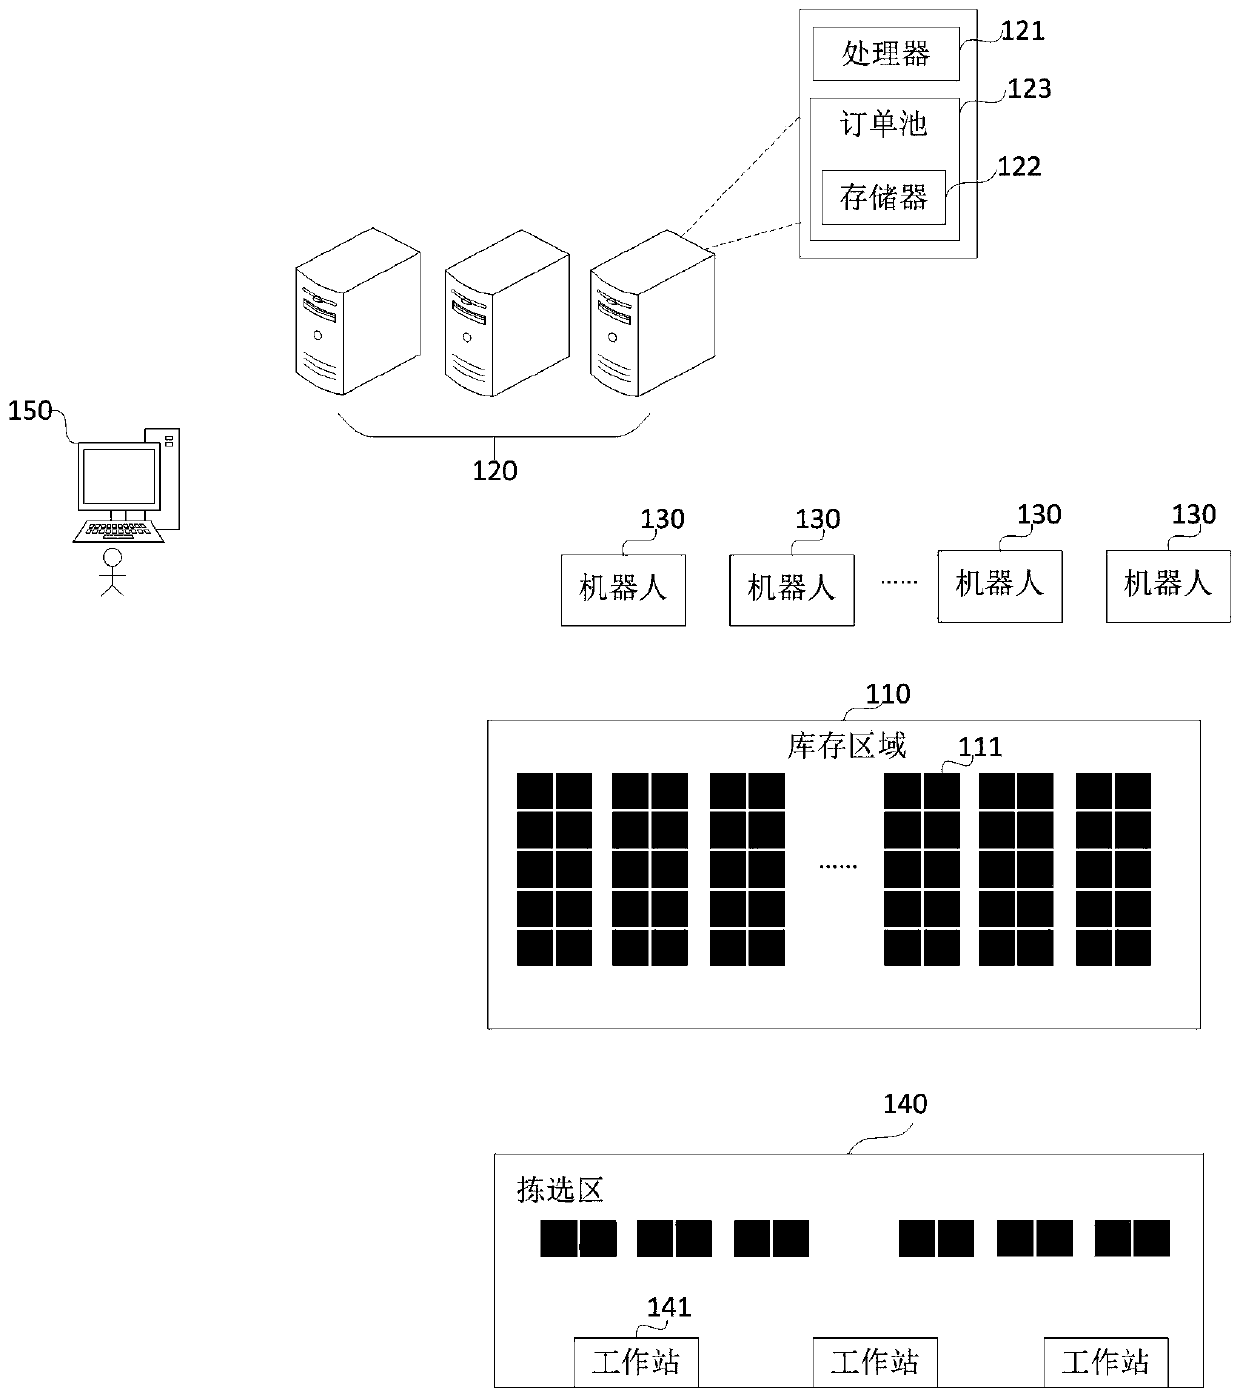 Container storage system, warehousing system, robot control method and robot